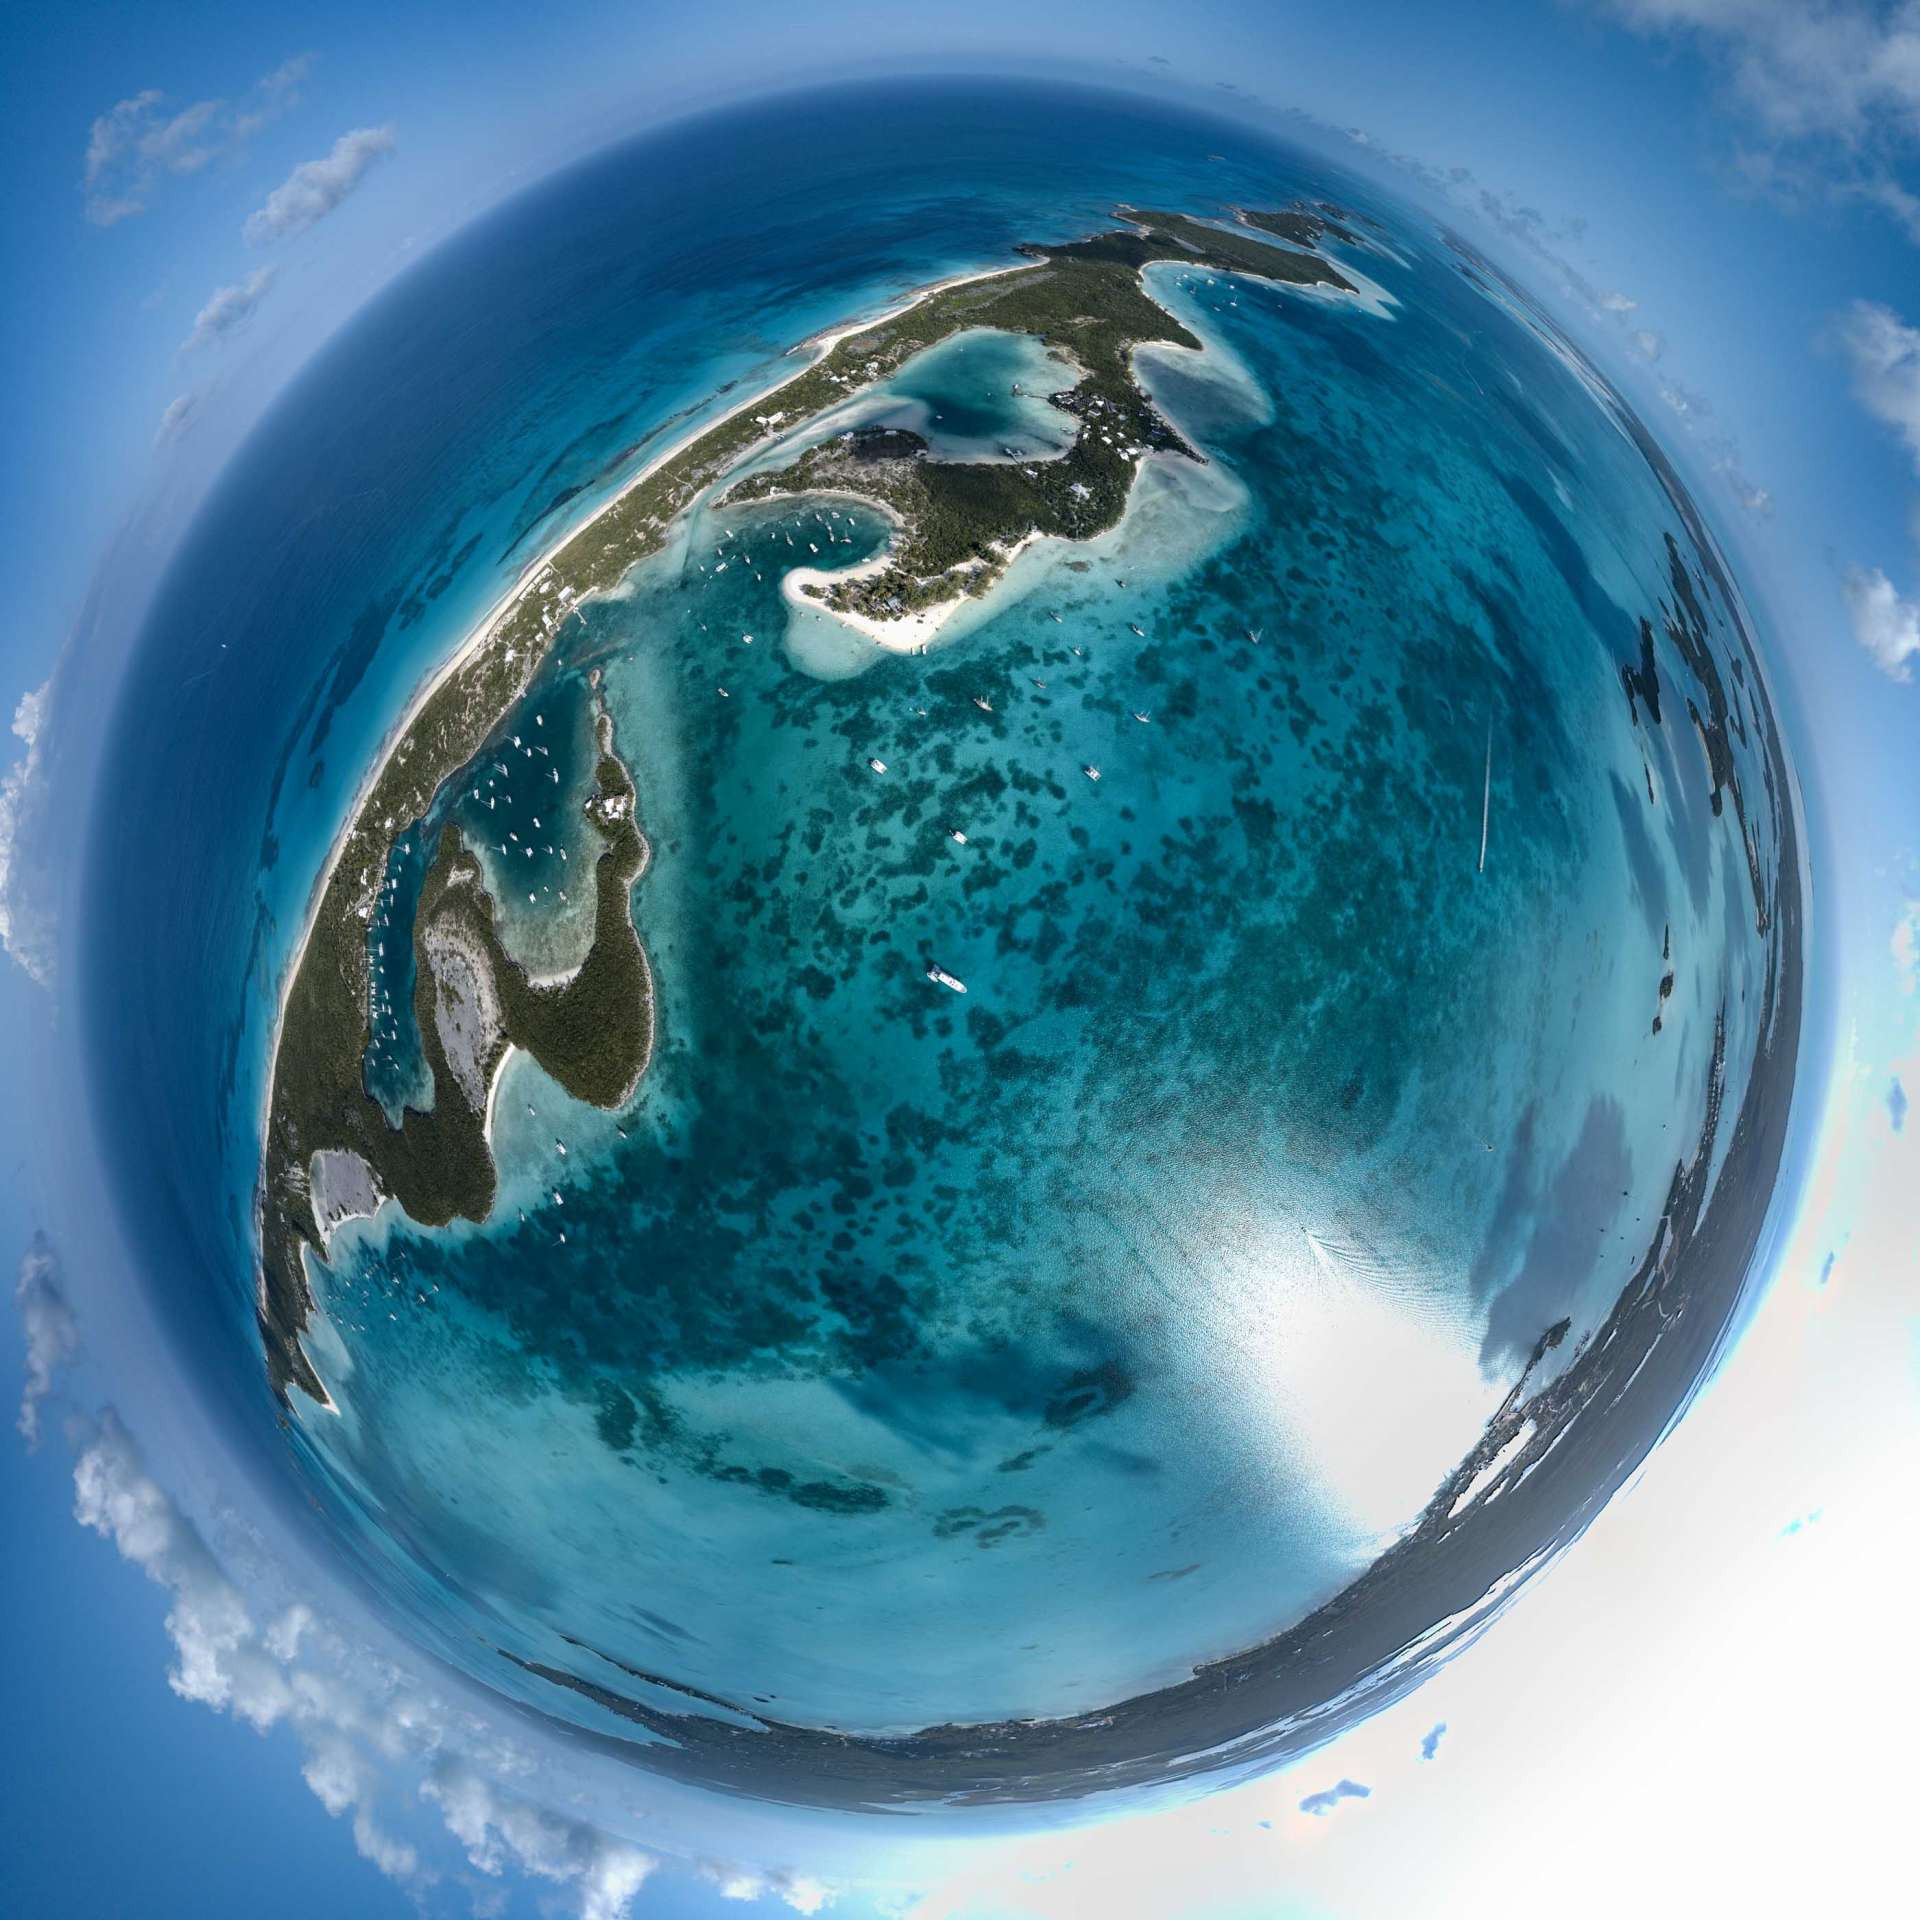 aerial view drone Chat N Chill Stocking Island Exuma Bahamas little planet